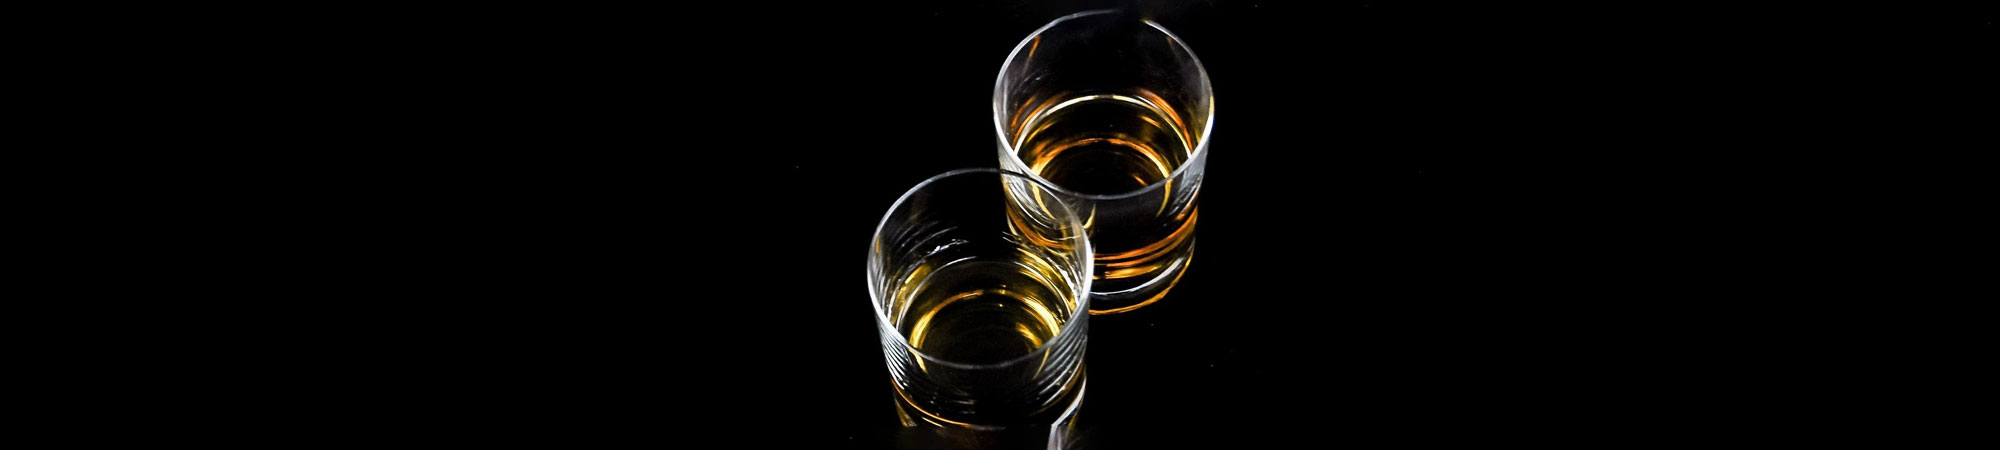 Two glasses of whiskey with amber liquid, reflected on a shiny black surface against a dark background, creating a symmetrical visual.